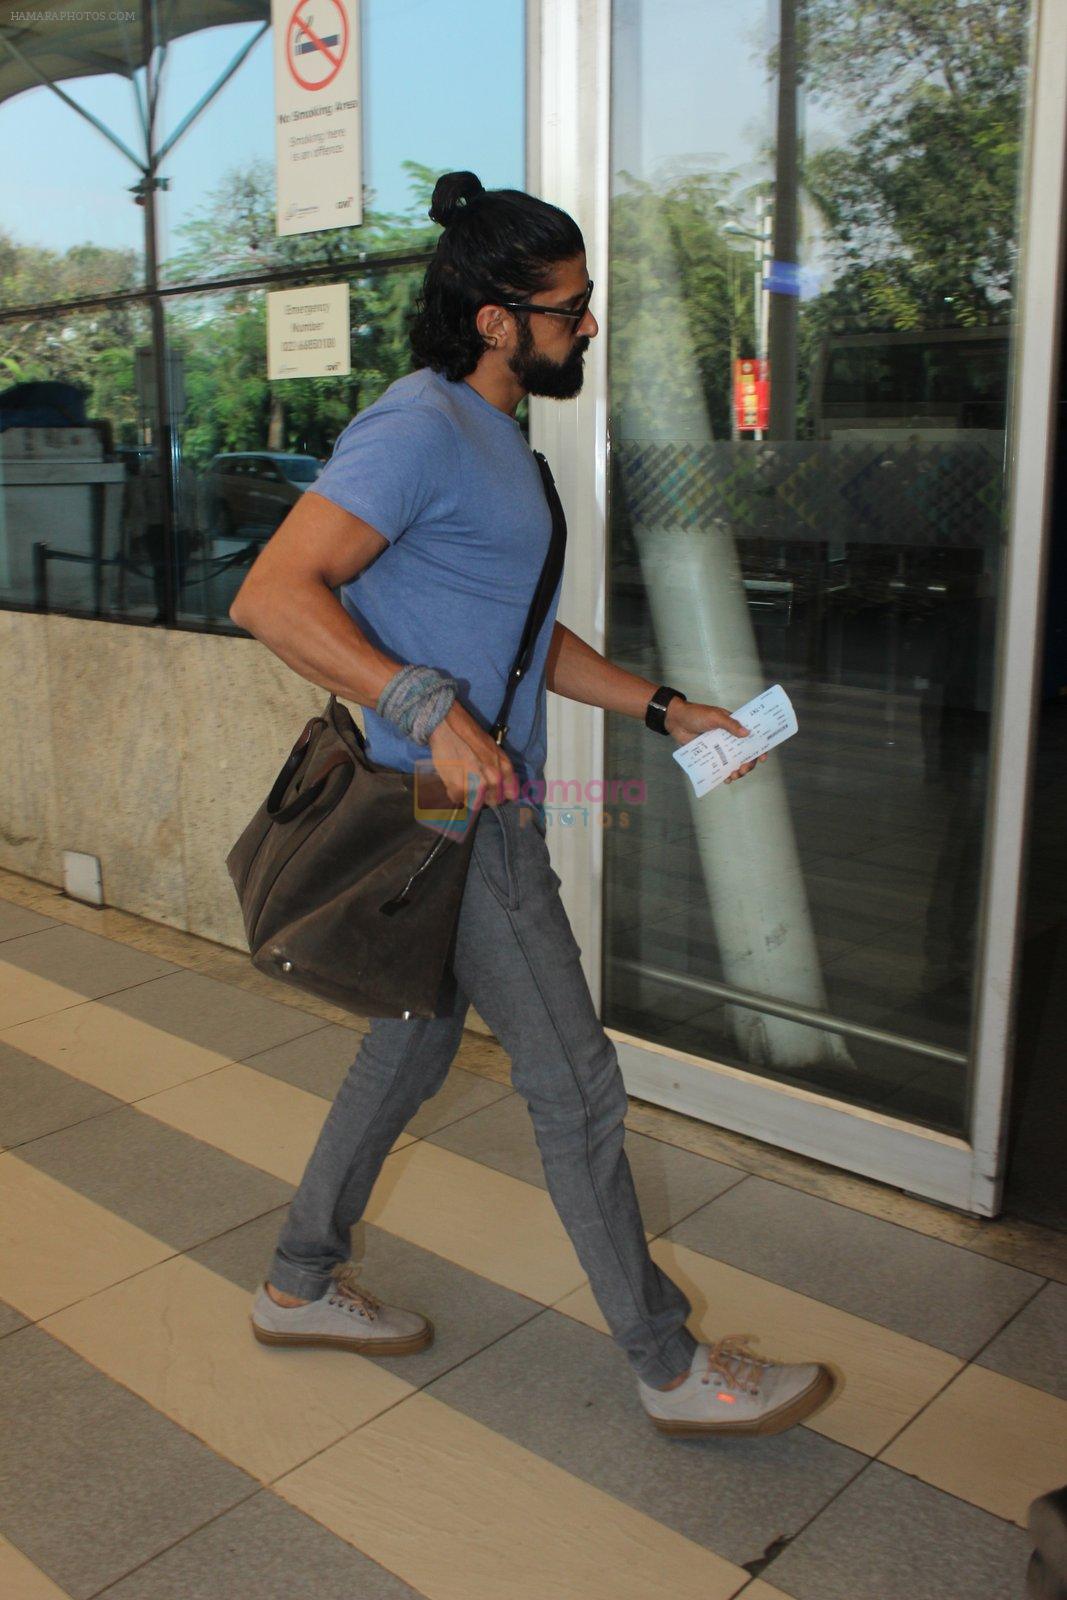 Farhan Akhtar snapped at airport on 1st Feb 2016